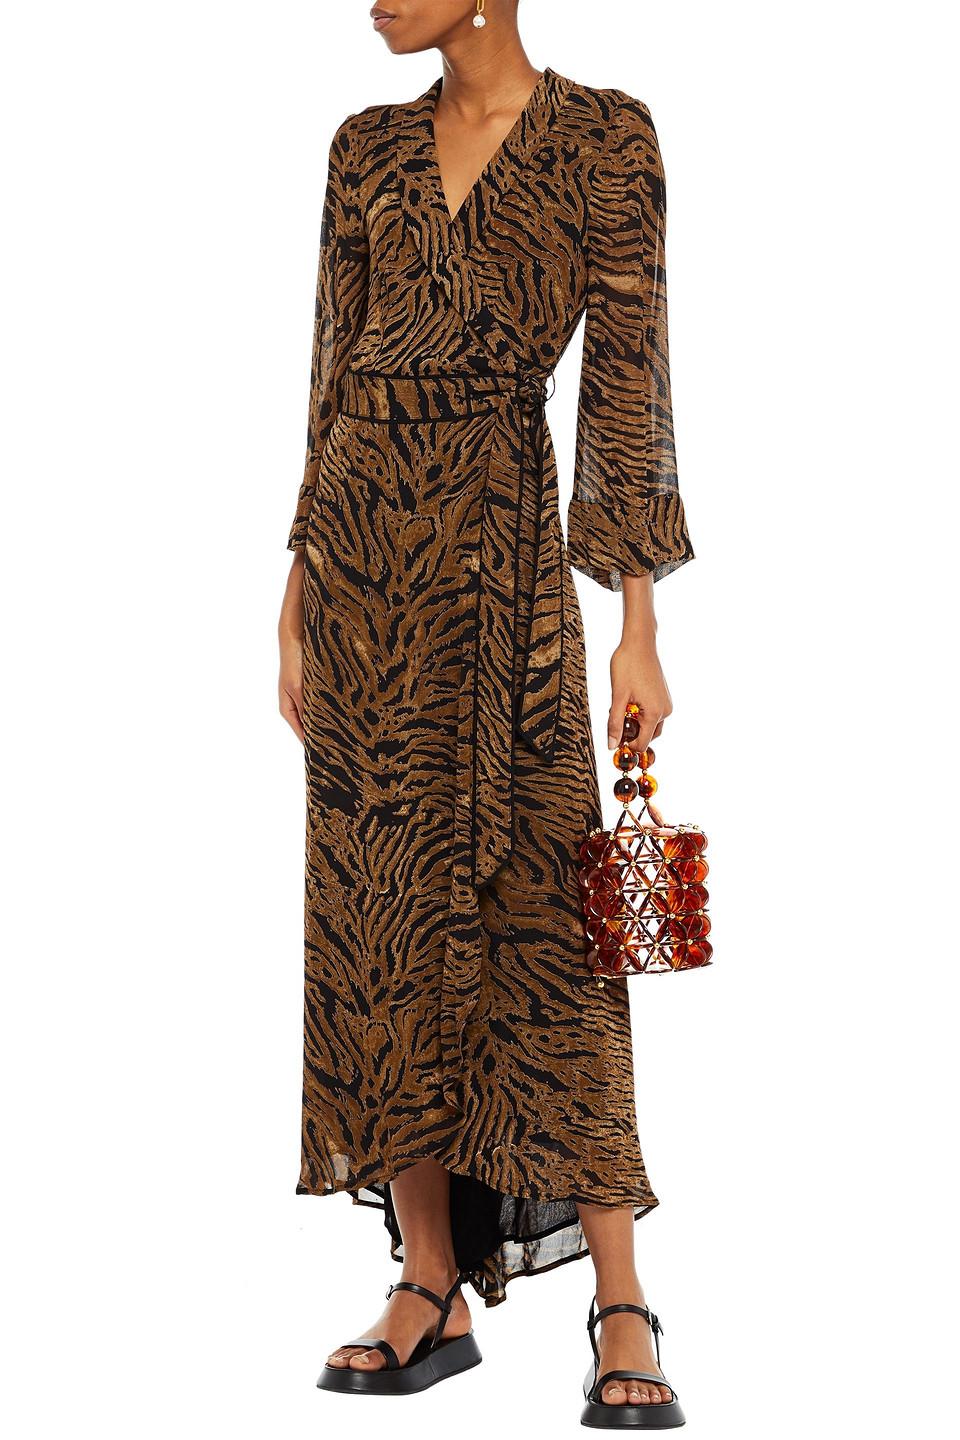 Ganni Synthetic Tiger-print Georgette Maxi Wrap Dress in Animal Print  (Brown) - Lyst